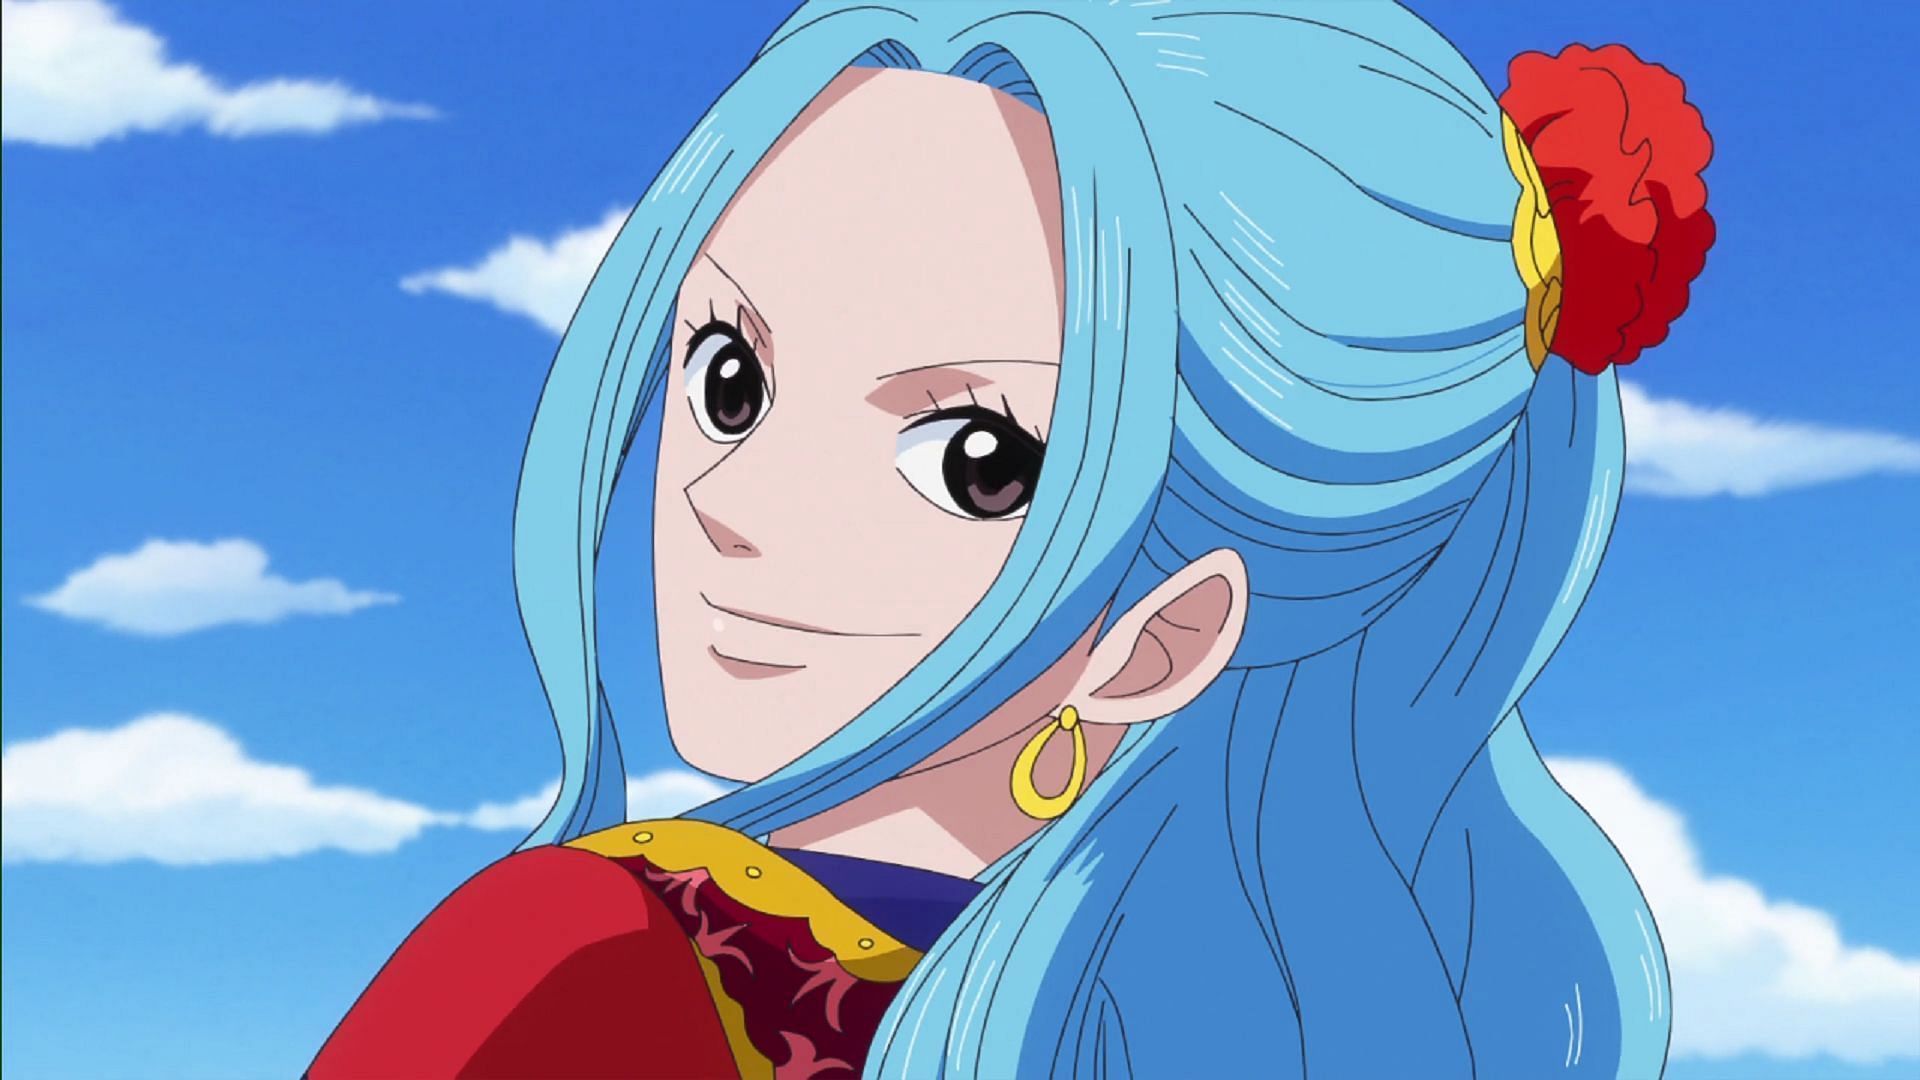 Vivi&#039;s appearance is teased as similar to Lili&#039;s in One Piece chapter 1116 spoilers (Image via Toei Animation)